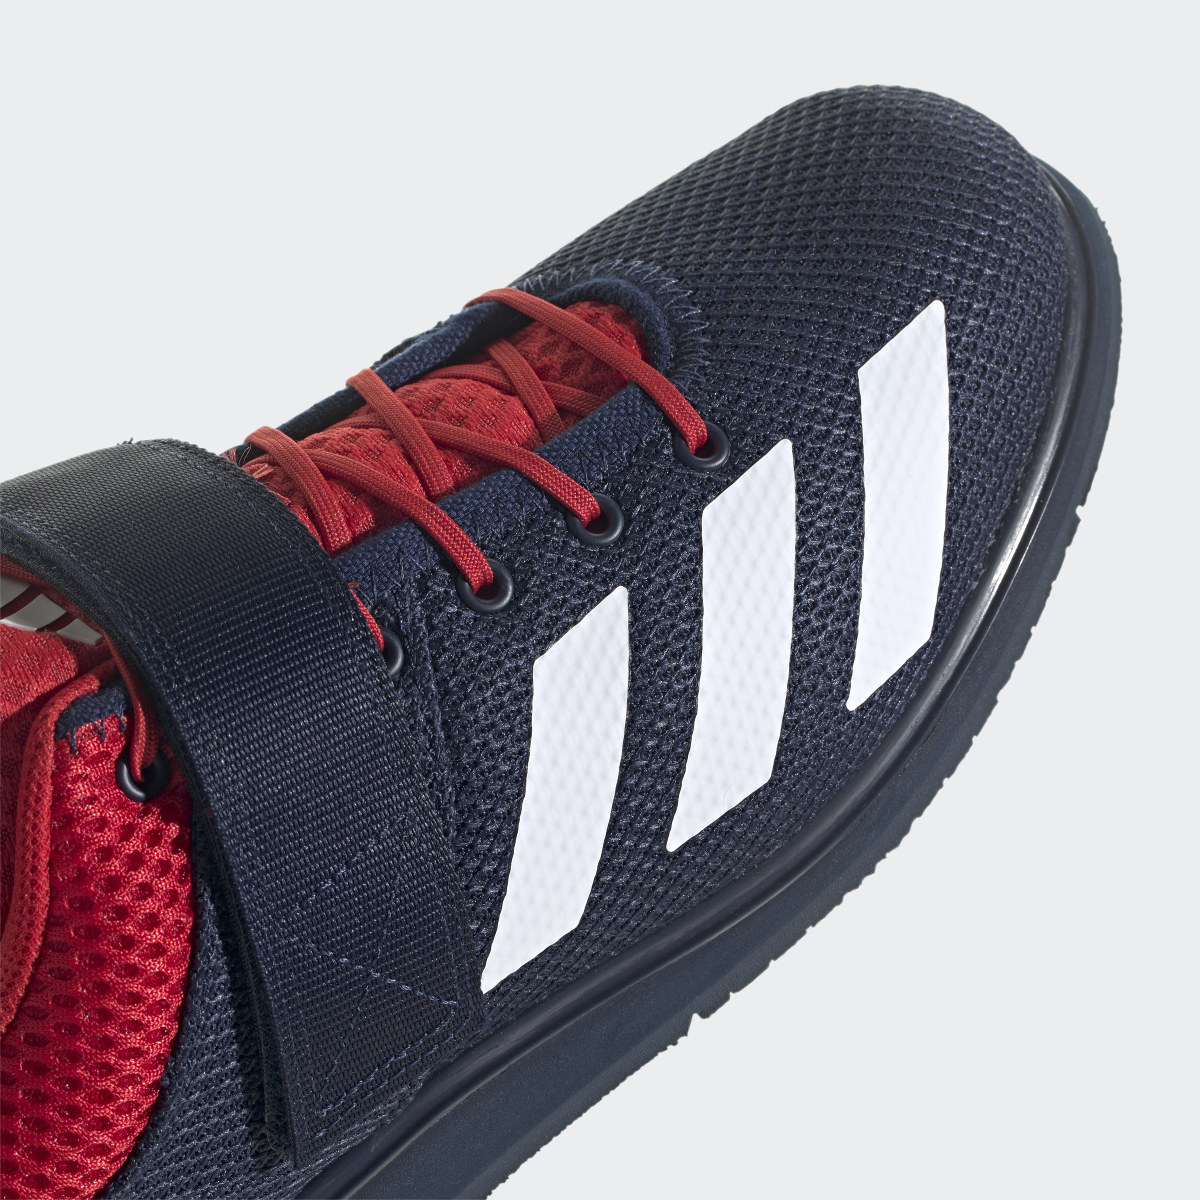 Adidas Powerlift 5 Weightlifting Shoes. 10